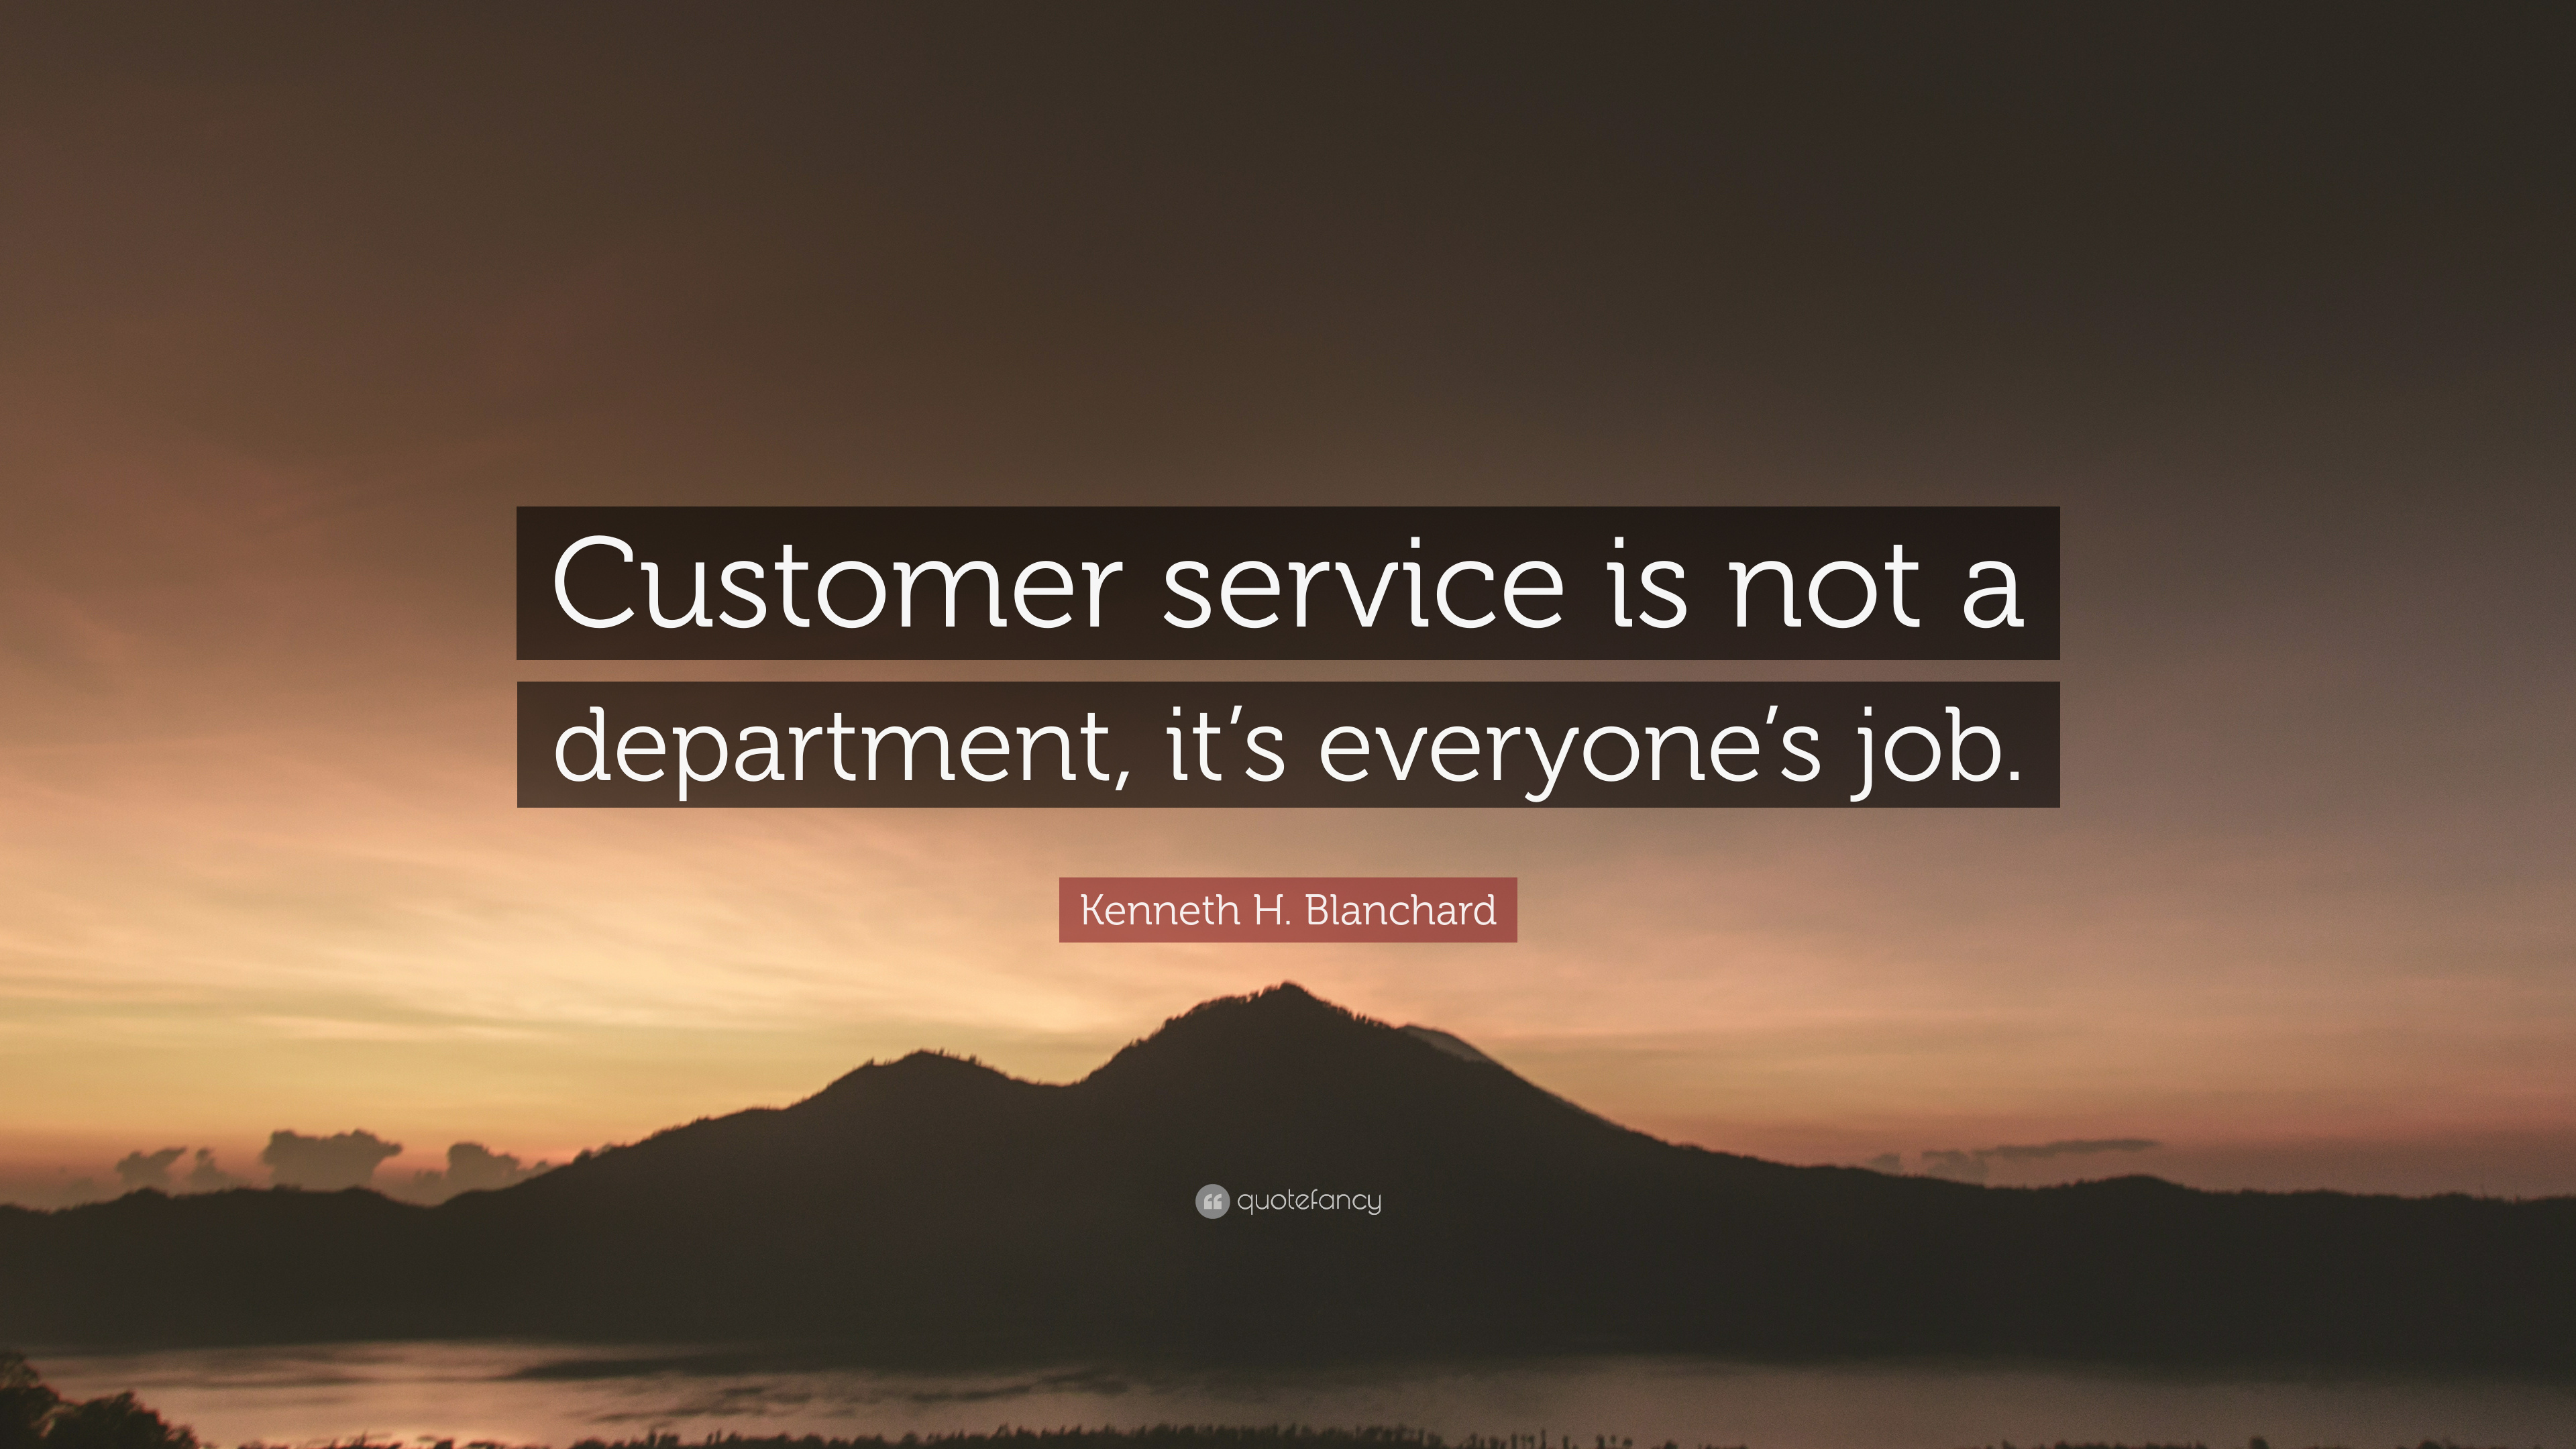 Kenneth H. Blanchard Quote: “Customer service is not a department, it's everyone's job.”